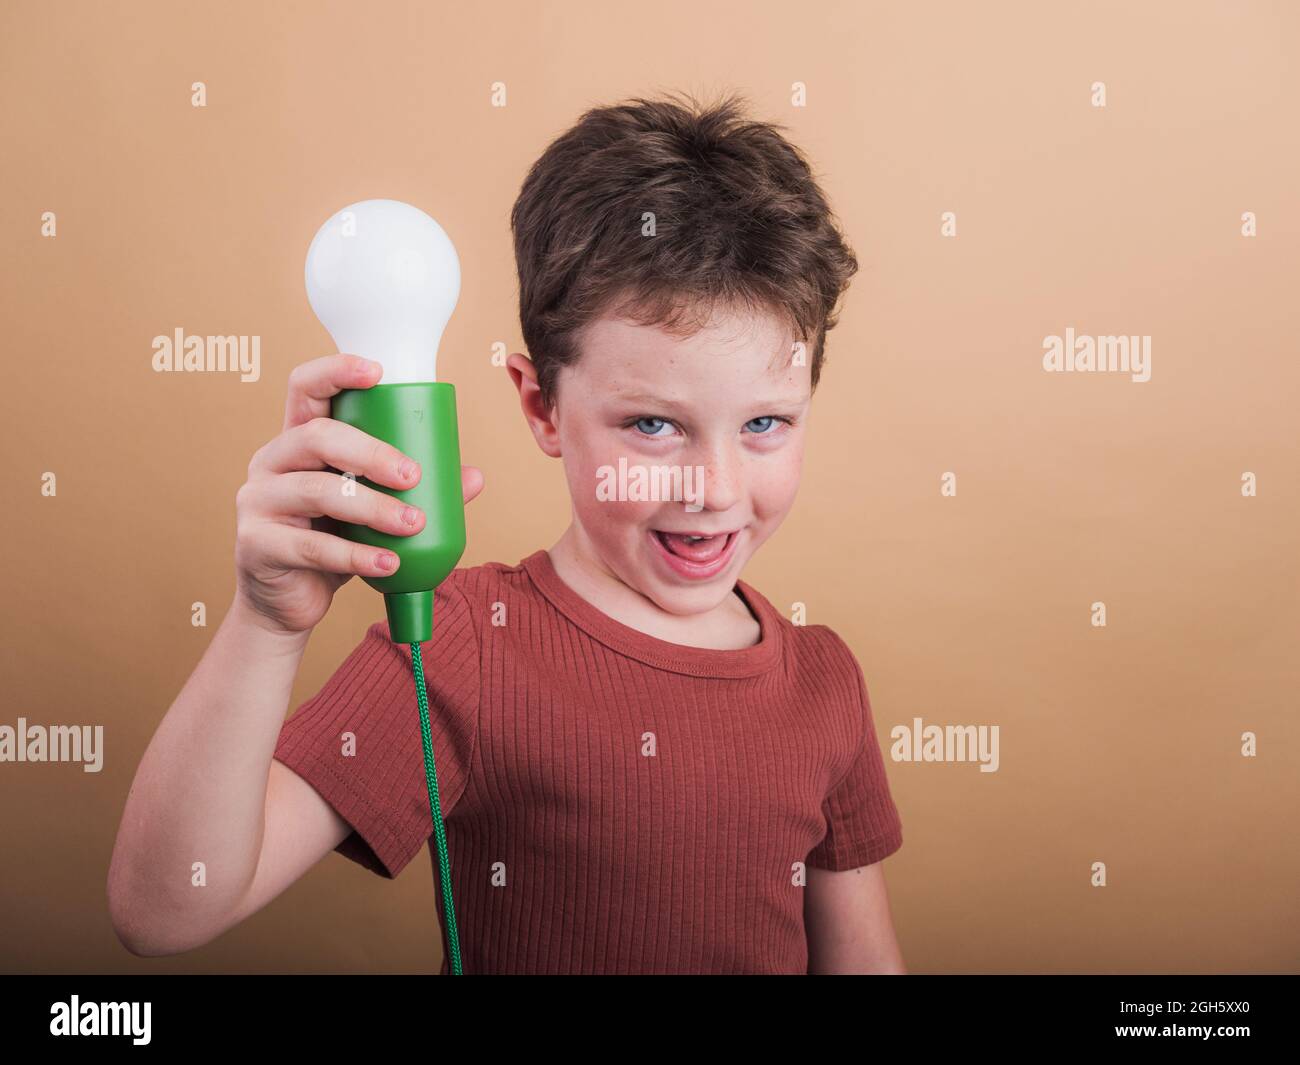 Pondering child in t shirt with plastic light bulb representing idea concept looking at camera on beige background Stock Photo